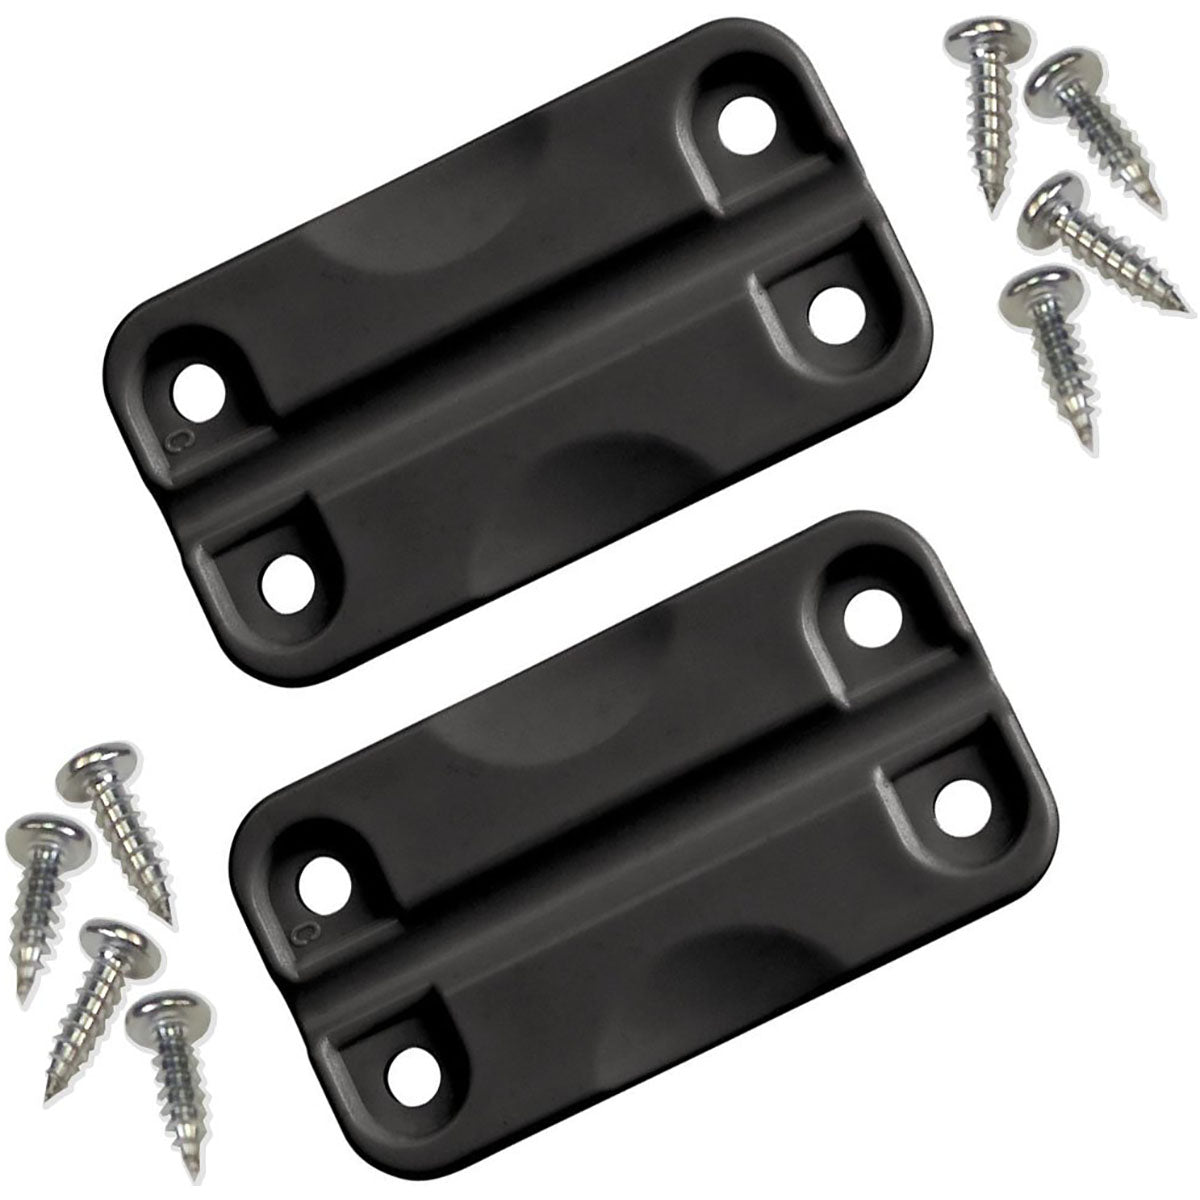 IGLOO Extended Life Riteflex Hinges for Coolers - Universal Fit - Black IGLOO